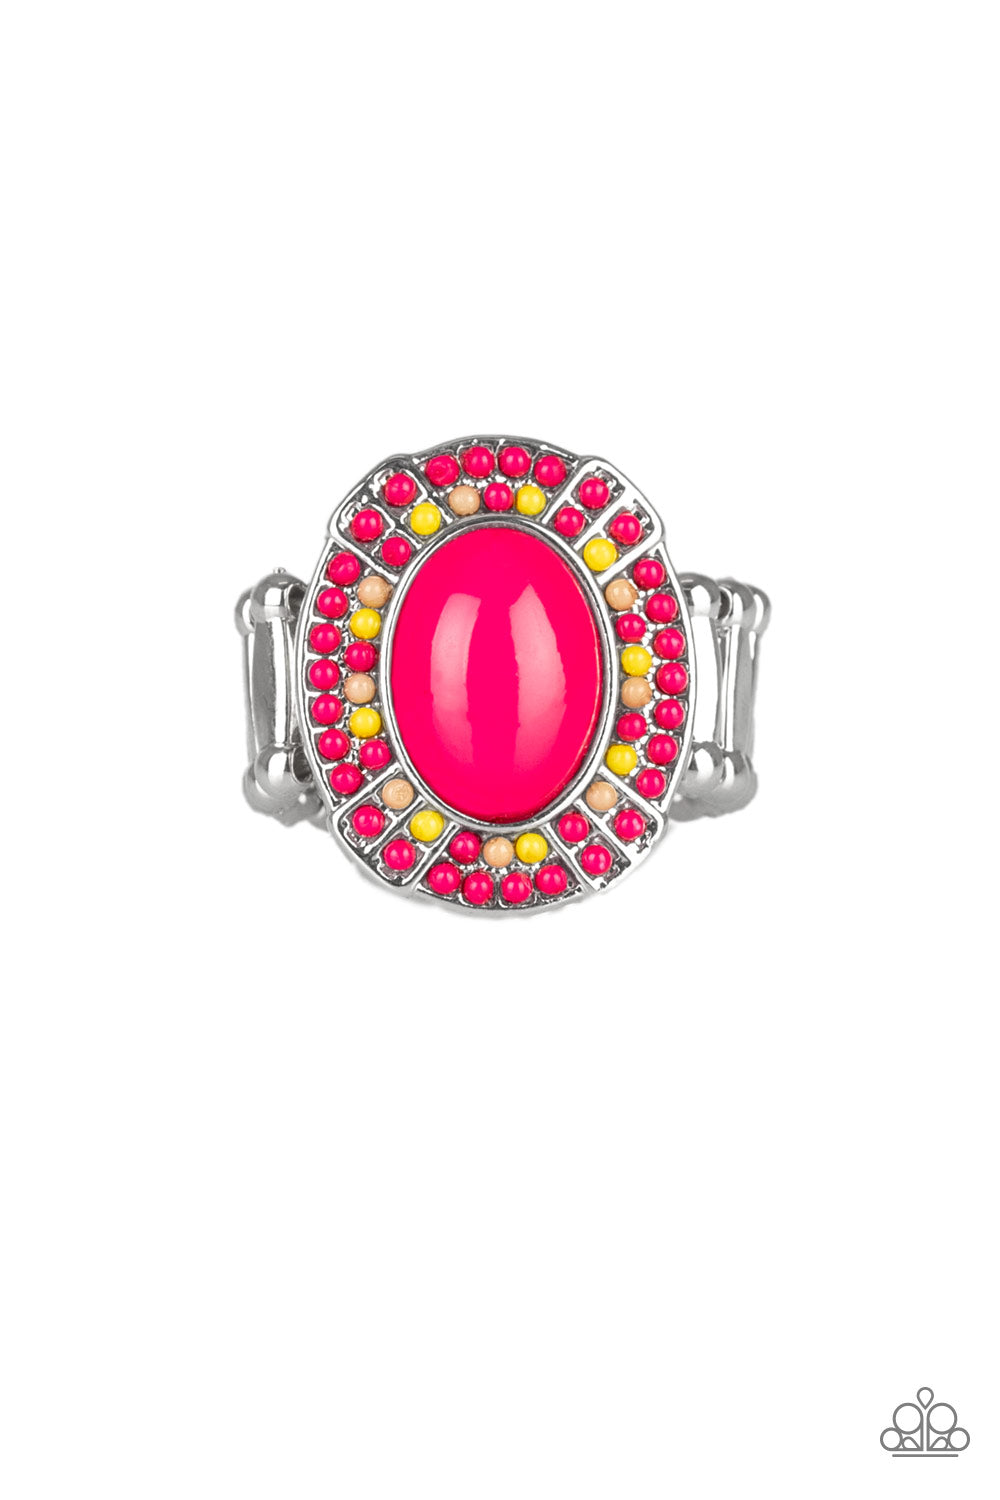 COLORFULLY RUSTIC - PINK AND YELLOW OVAL RING